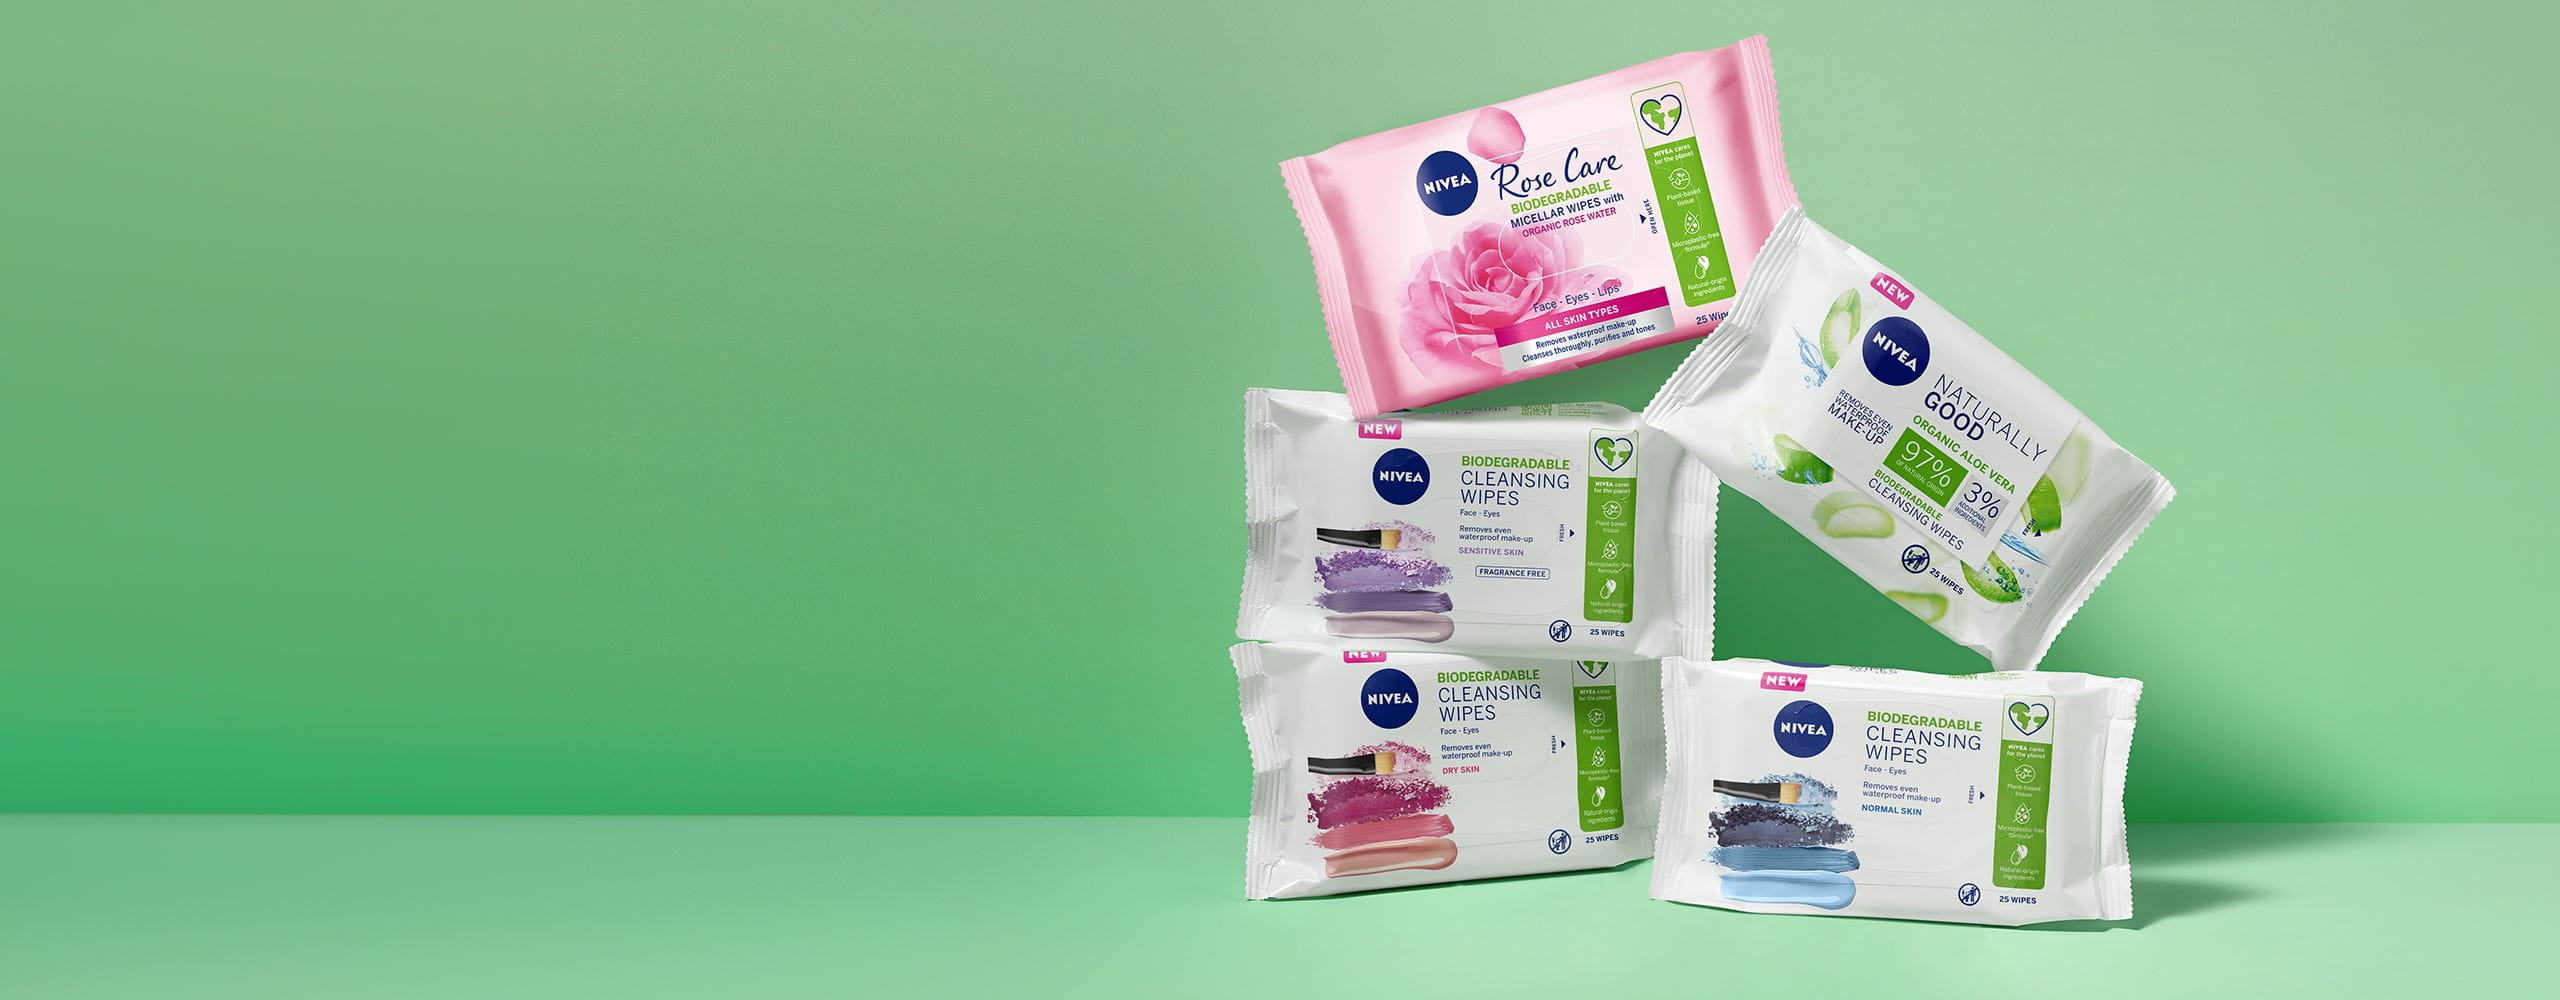 New NIVEA Biodegradable Cleansing Wipes